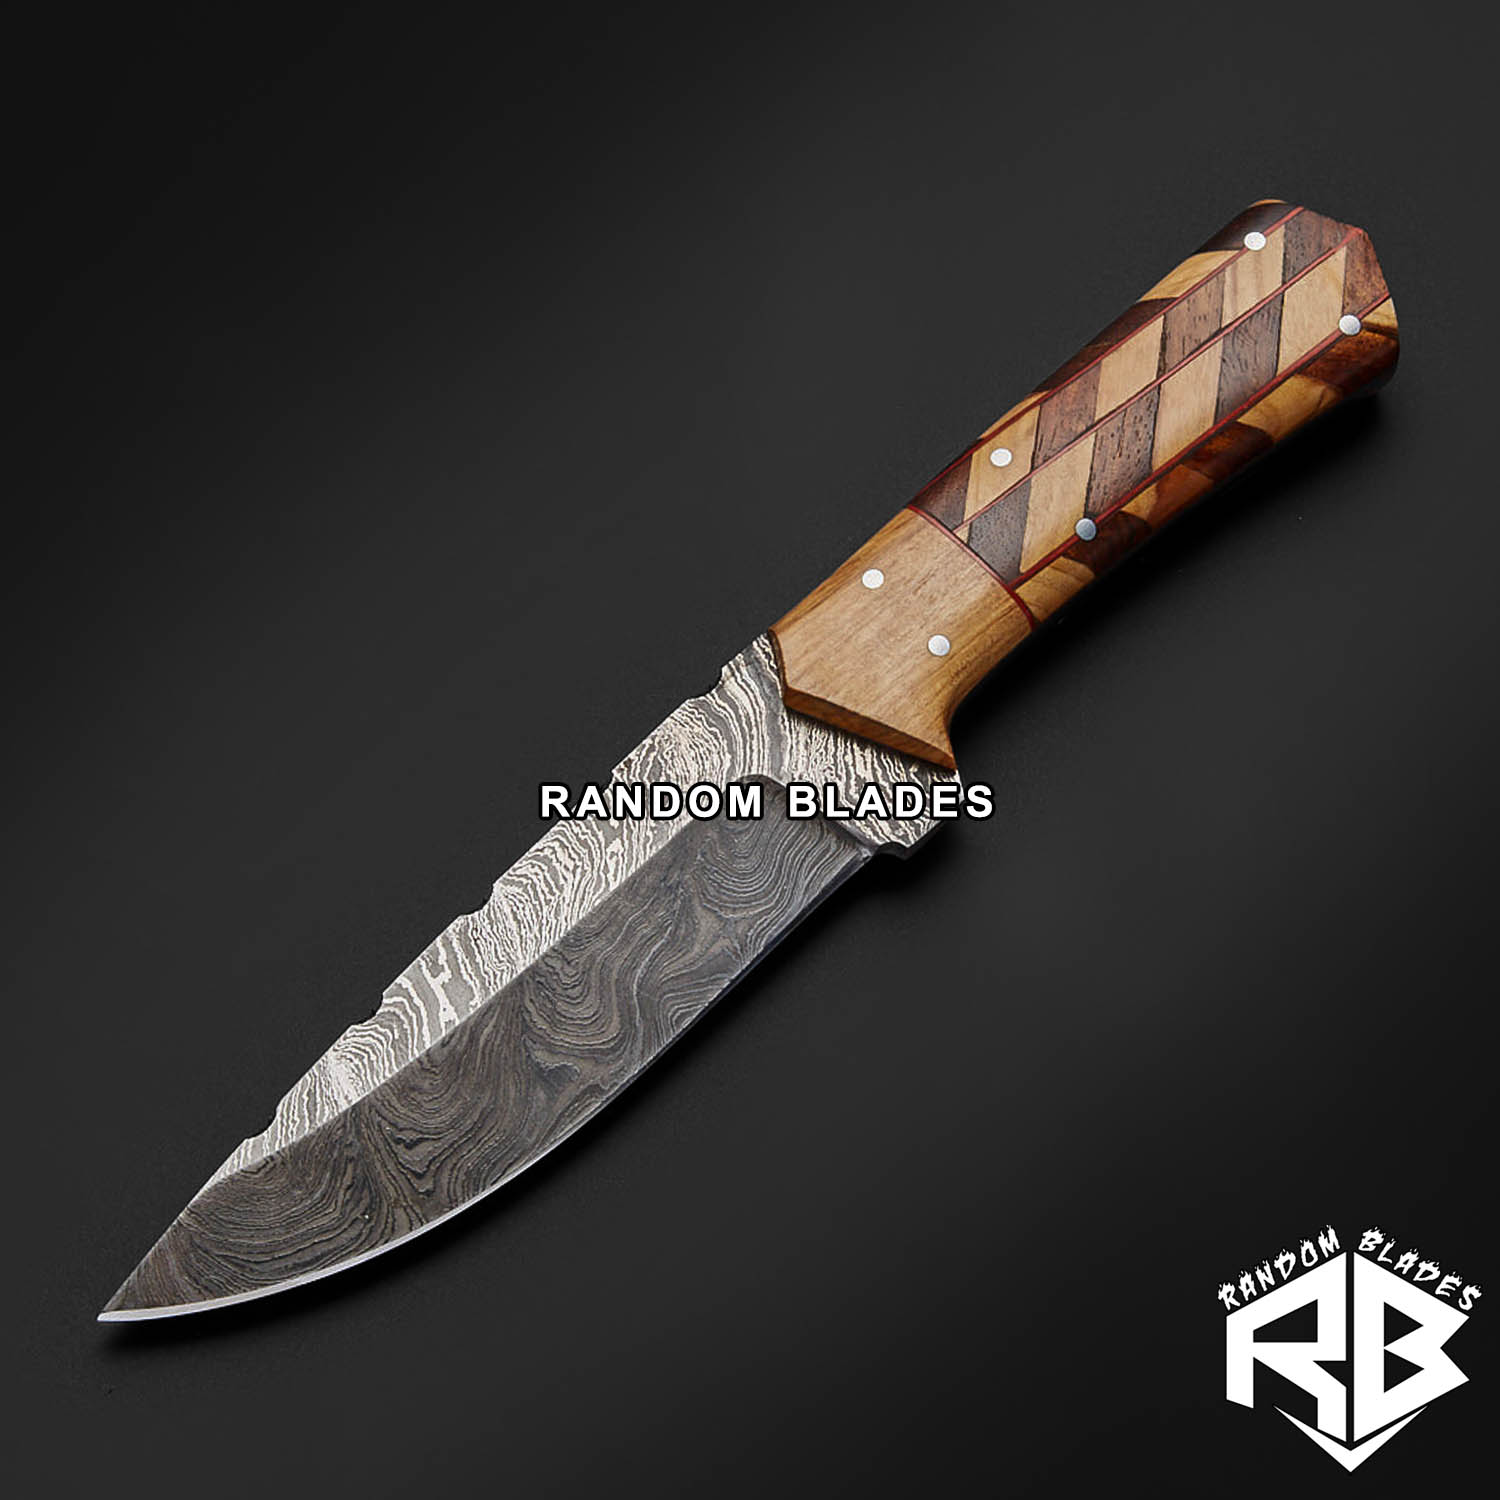 Damascus Steel Knife for Sale